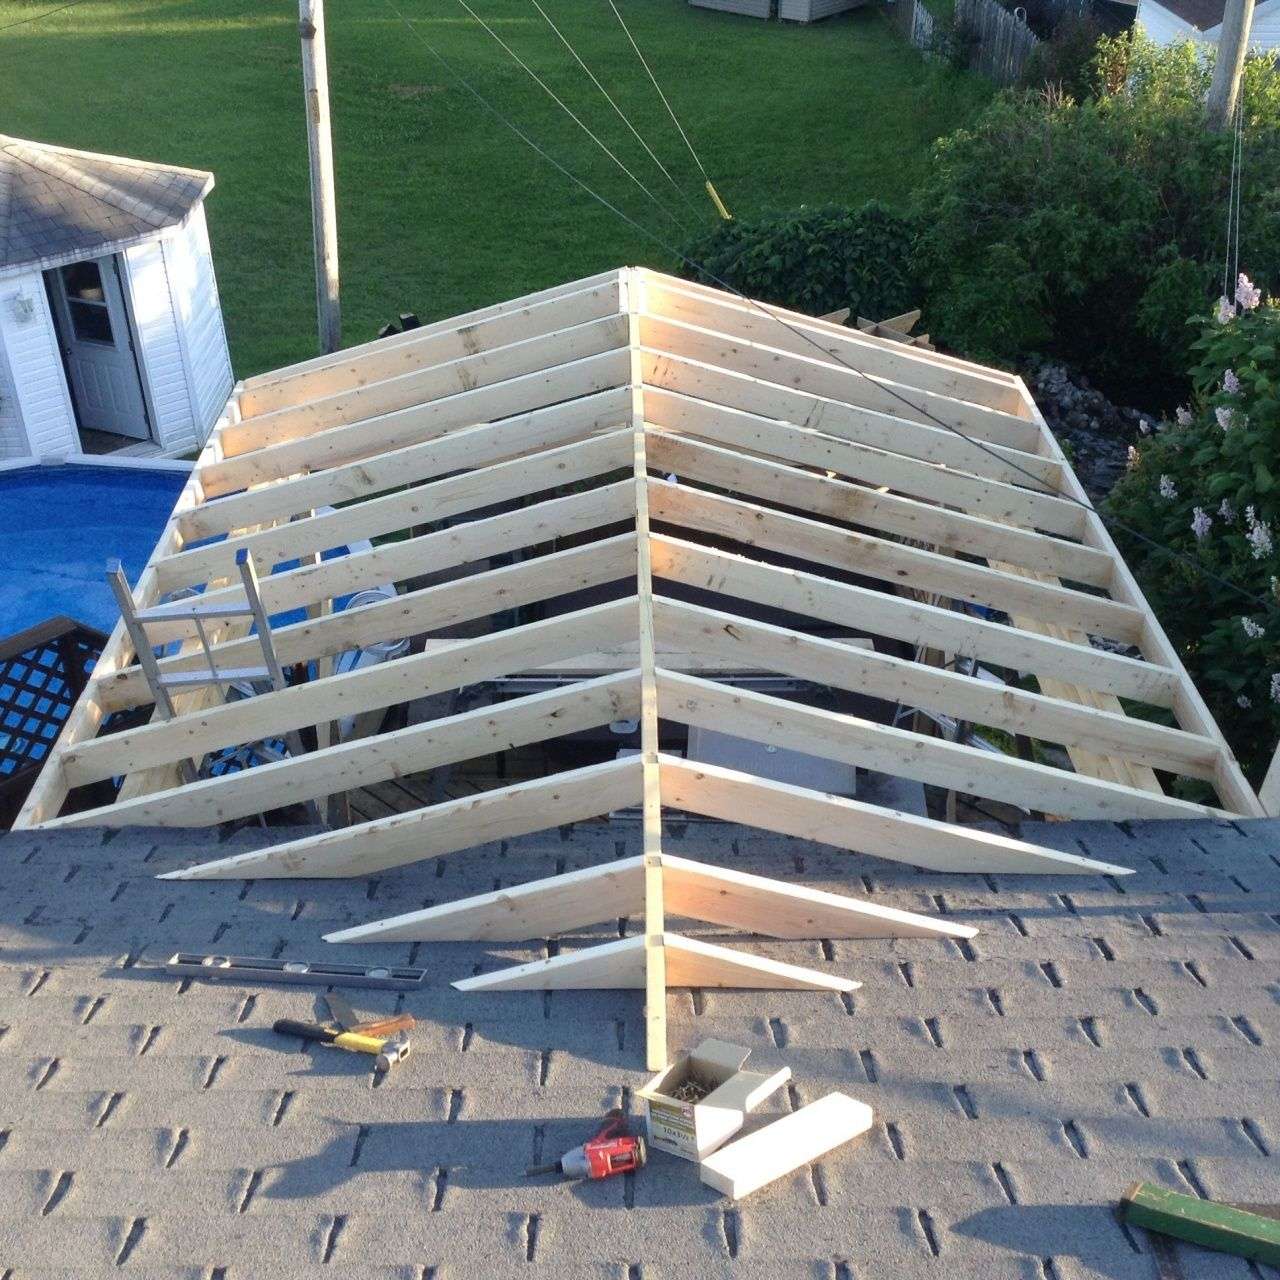 How To Extend A Roof Over A Patio Gable Roof Patio Cover ...